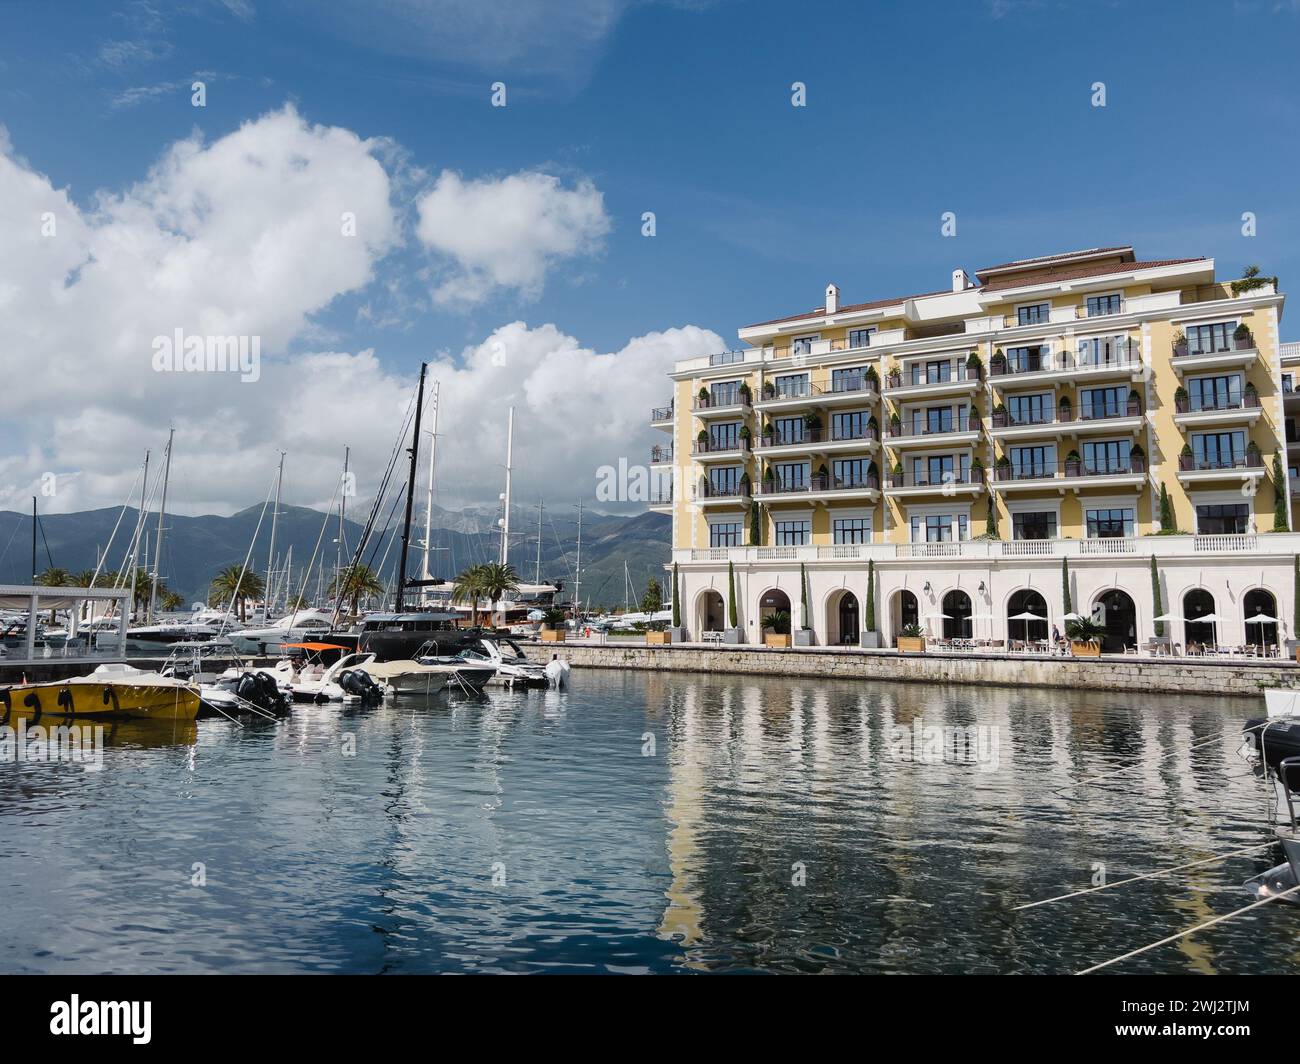 Tivat, Montenegro - 11 august 2023: Embankment of the Regent Hotel with green trees in tubs near the marina with yachts Stock Photo